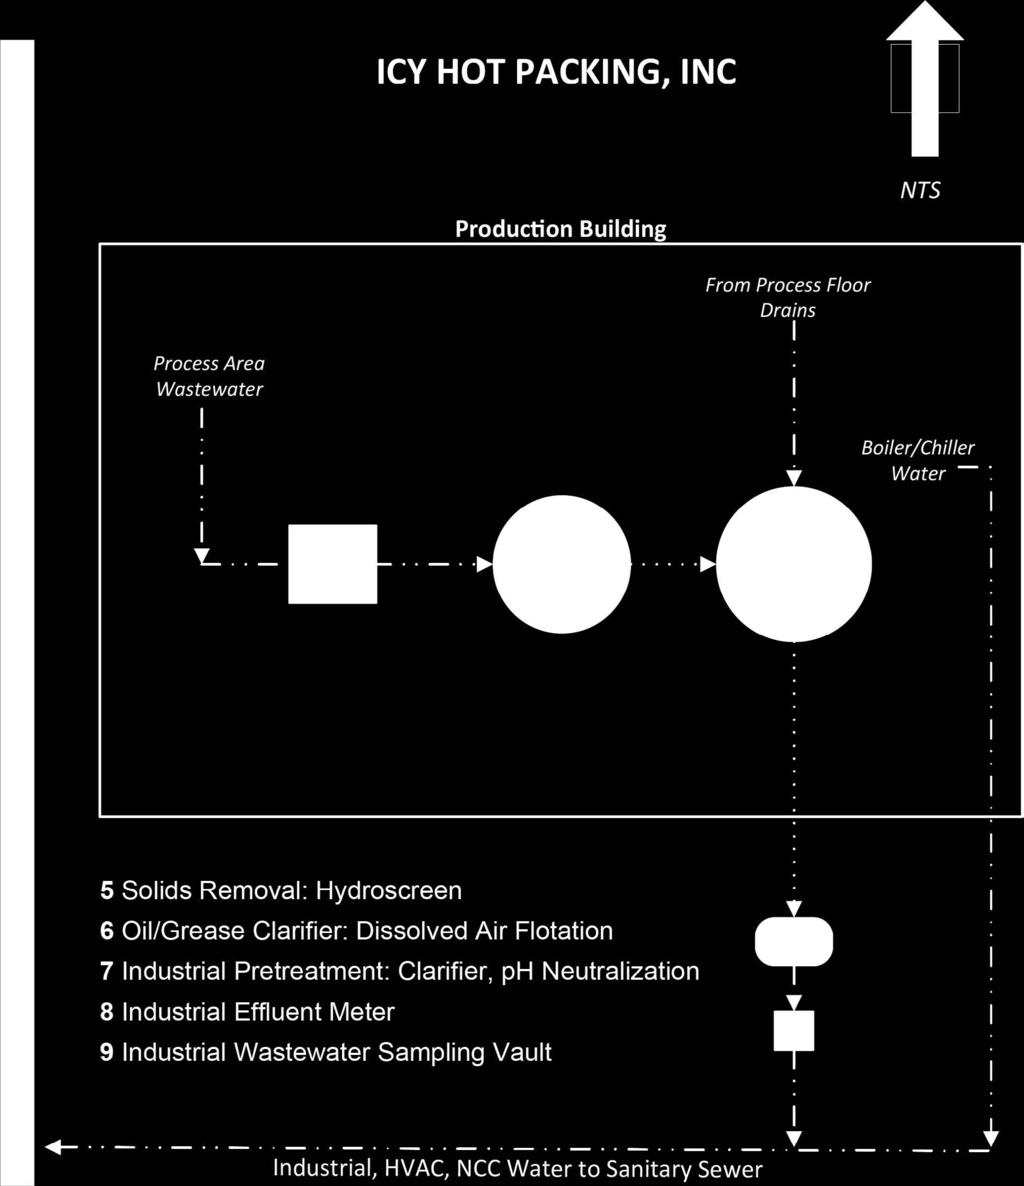 Appendix F: Pretreatment System Diagram Show all processes, with pertinent piping and equipment, that relate to the treatment of process or non-domestic wastewaters.